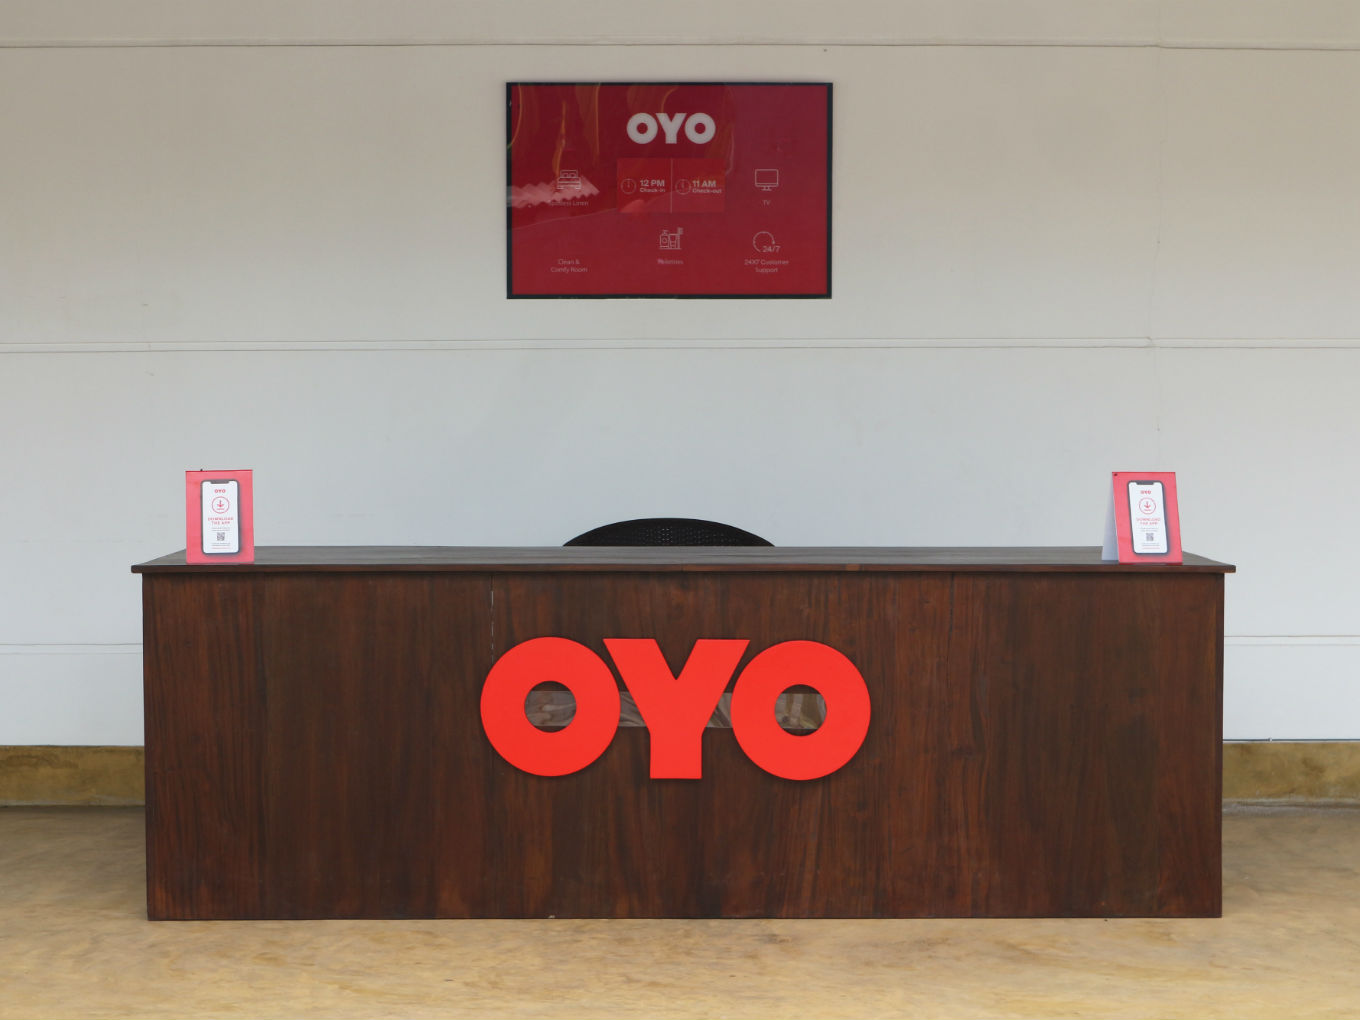 OYO Temporarily Suspends Hotel Owner Who Refused To Host J&K Man